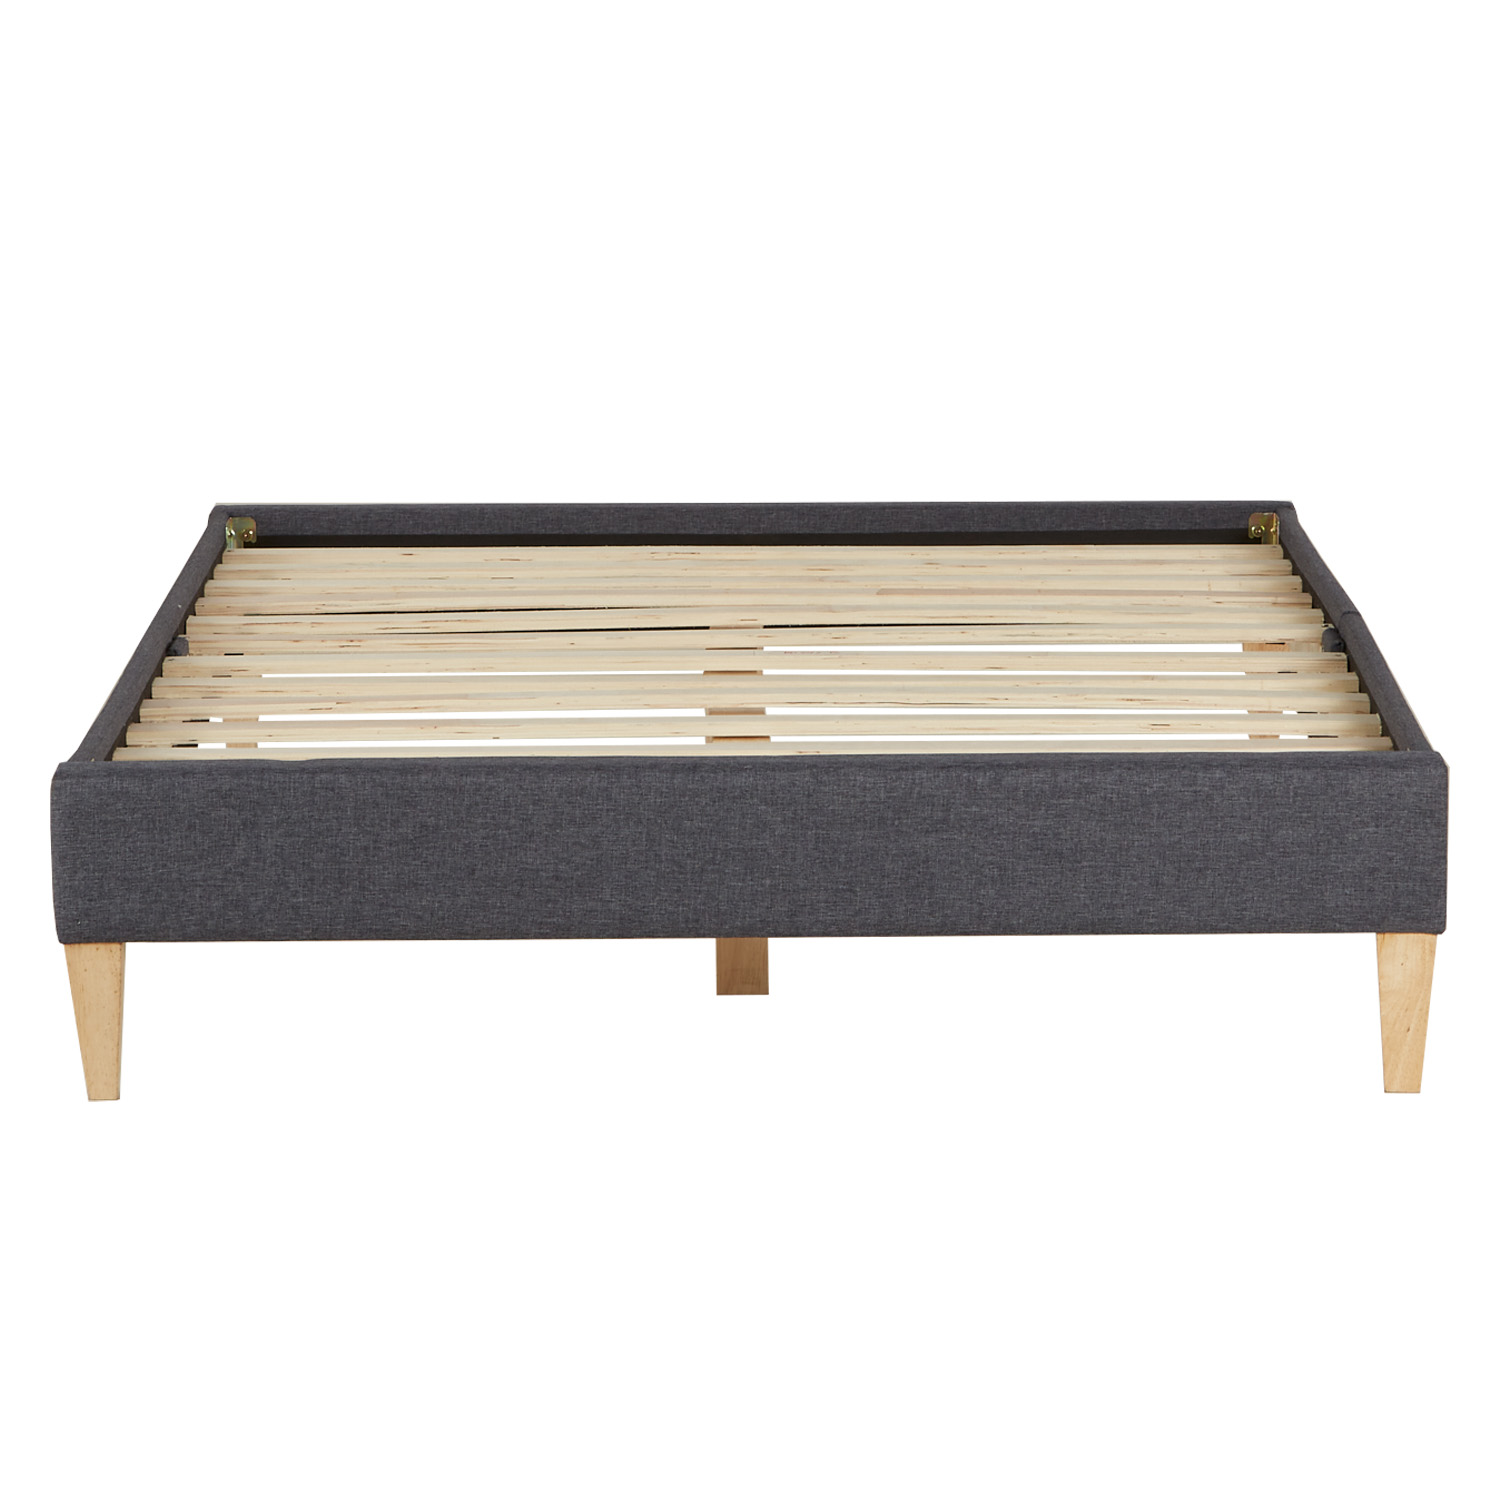 Upholstered Bed 140x200 cm with Slatts Grey Fabric Bed Double Bed Futon Bed Frame Platform Bed